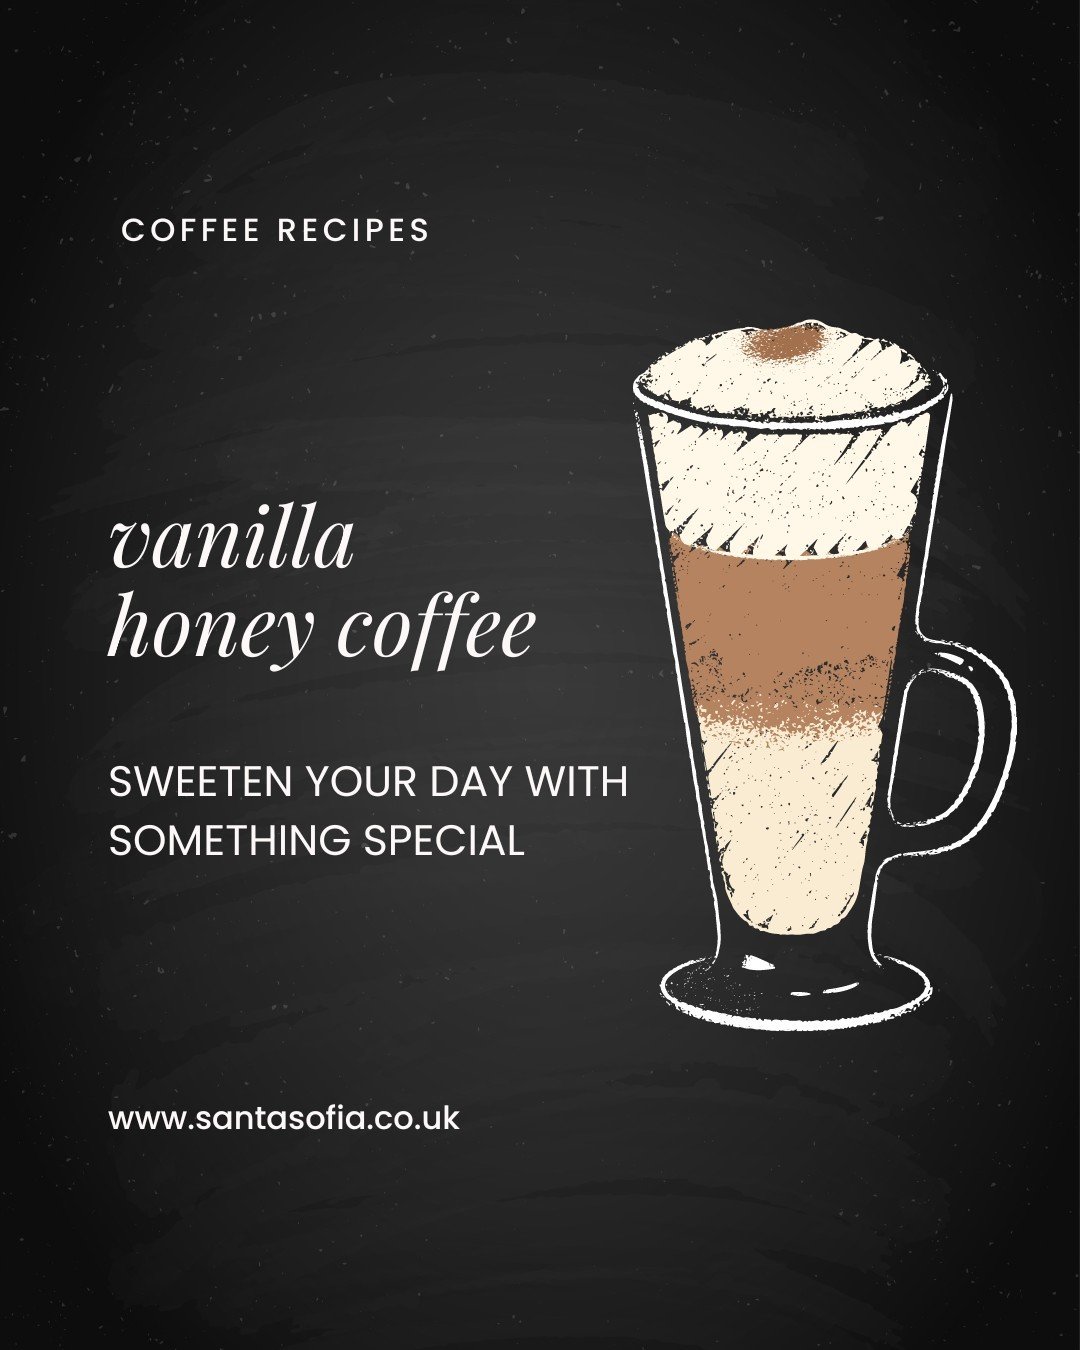 If you like vanilla and honey, this one&rsquo;s for you ↗️

There are many different coffee recipes, but today, we&rsquo;re sharing something special that&rsquo;ll sweeten your day - Vanilla Honey Iced Coffee.

It&rsquo;s easy to make this delicious 